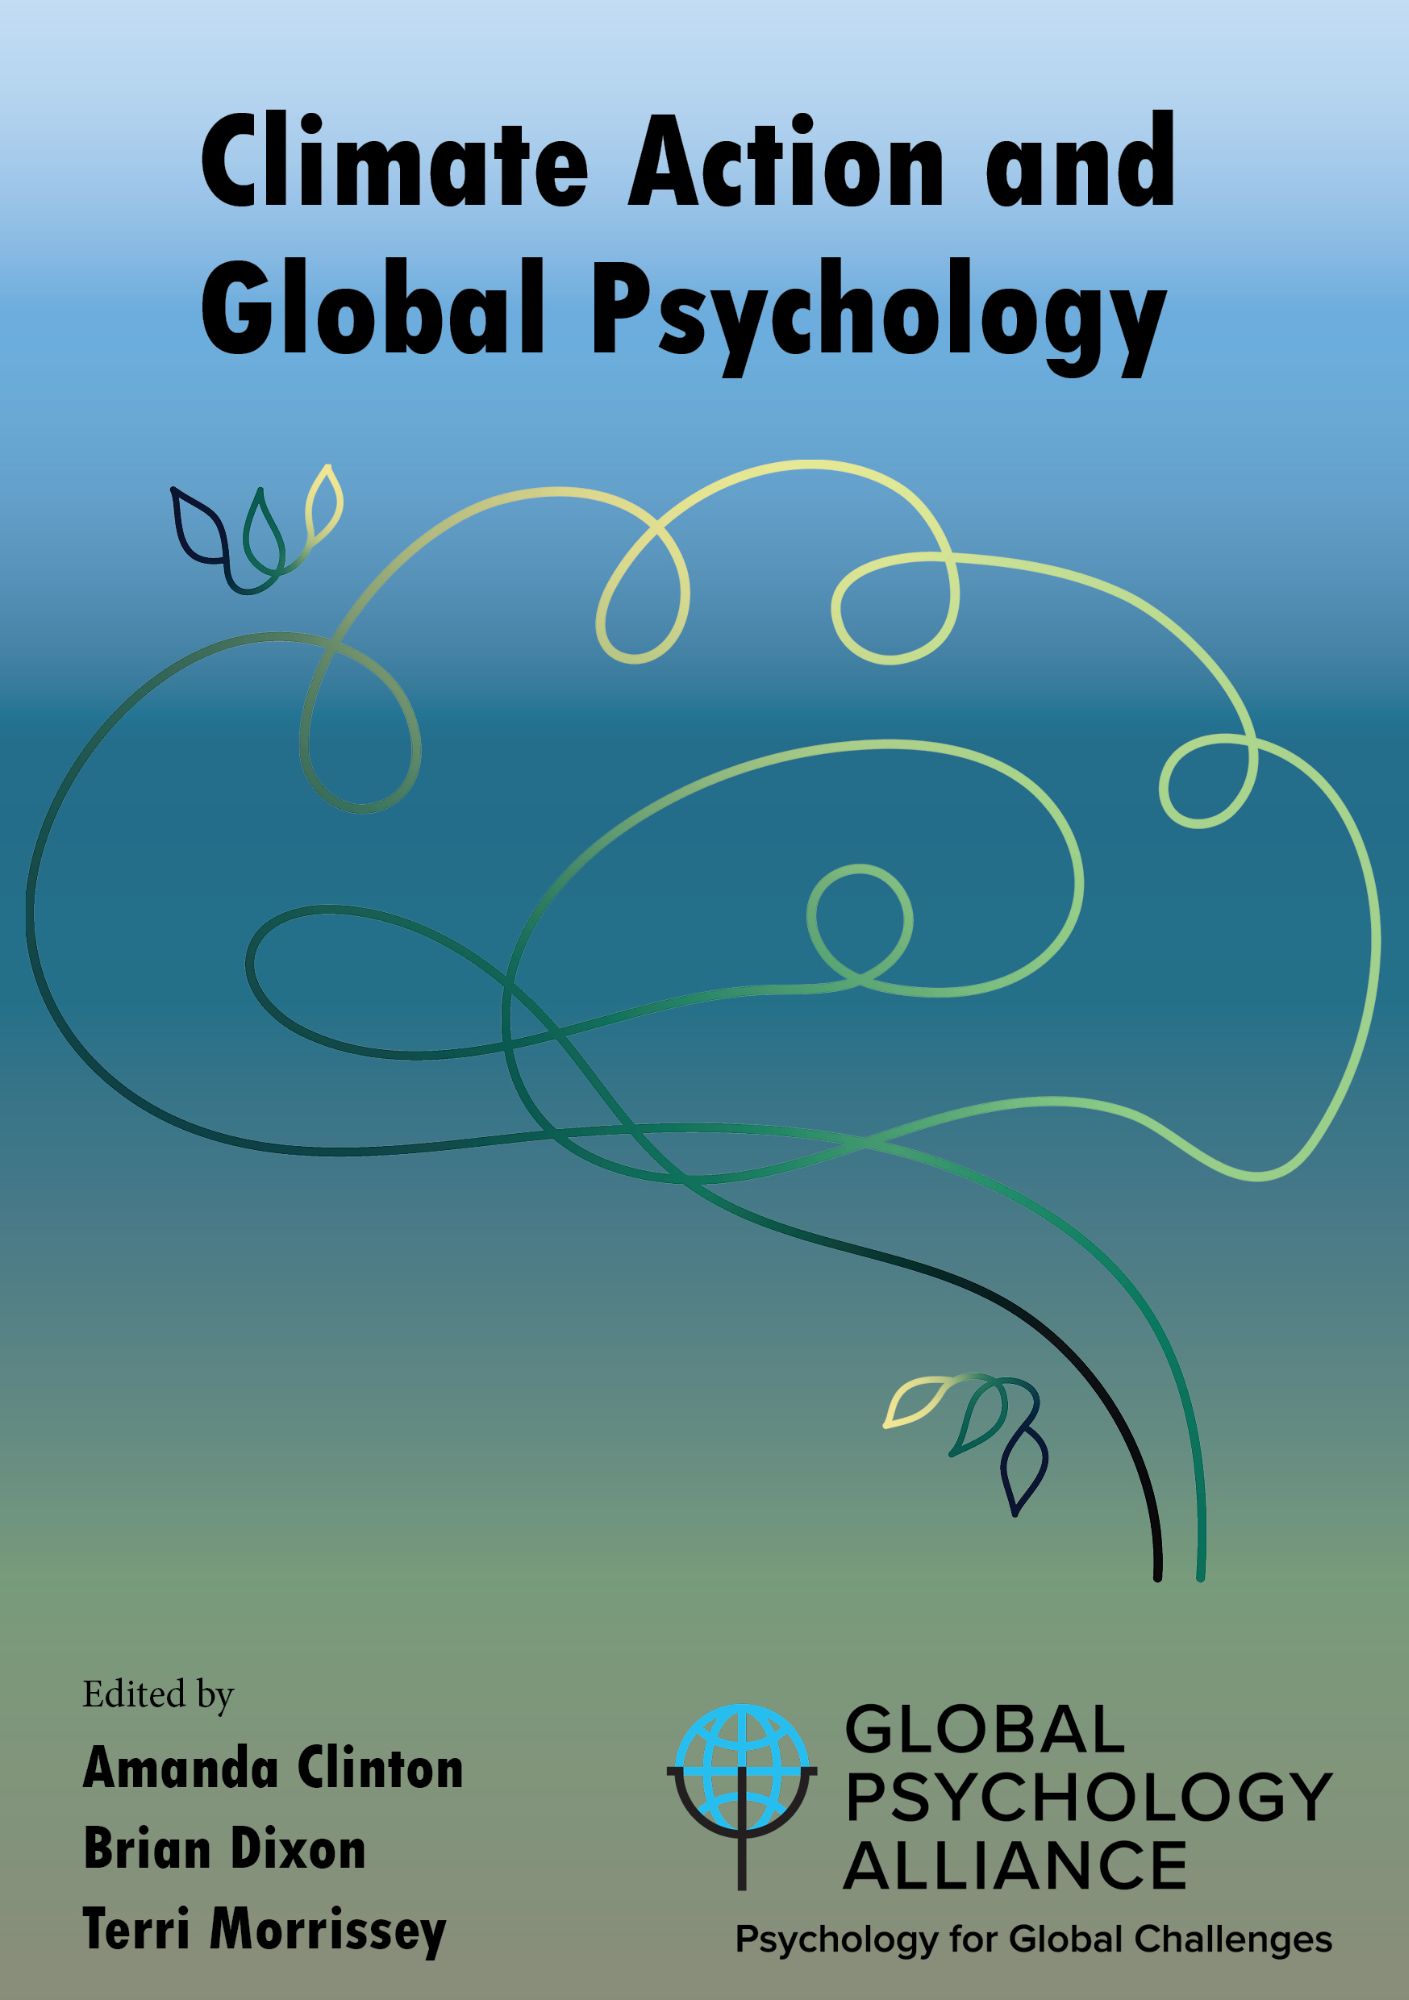 Climate Action and Global Psychology Cover new graphic2.jpg